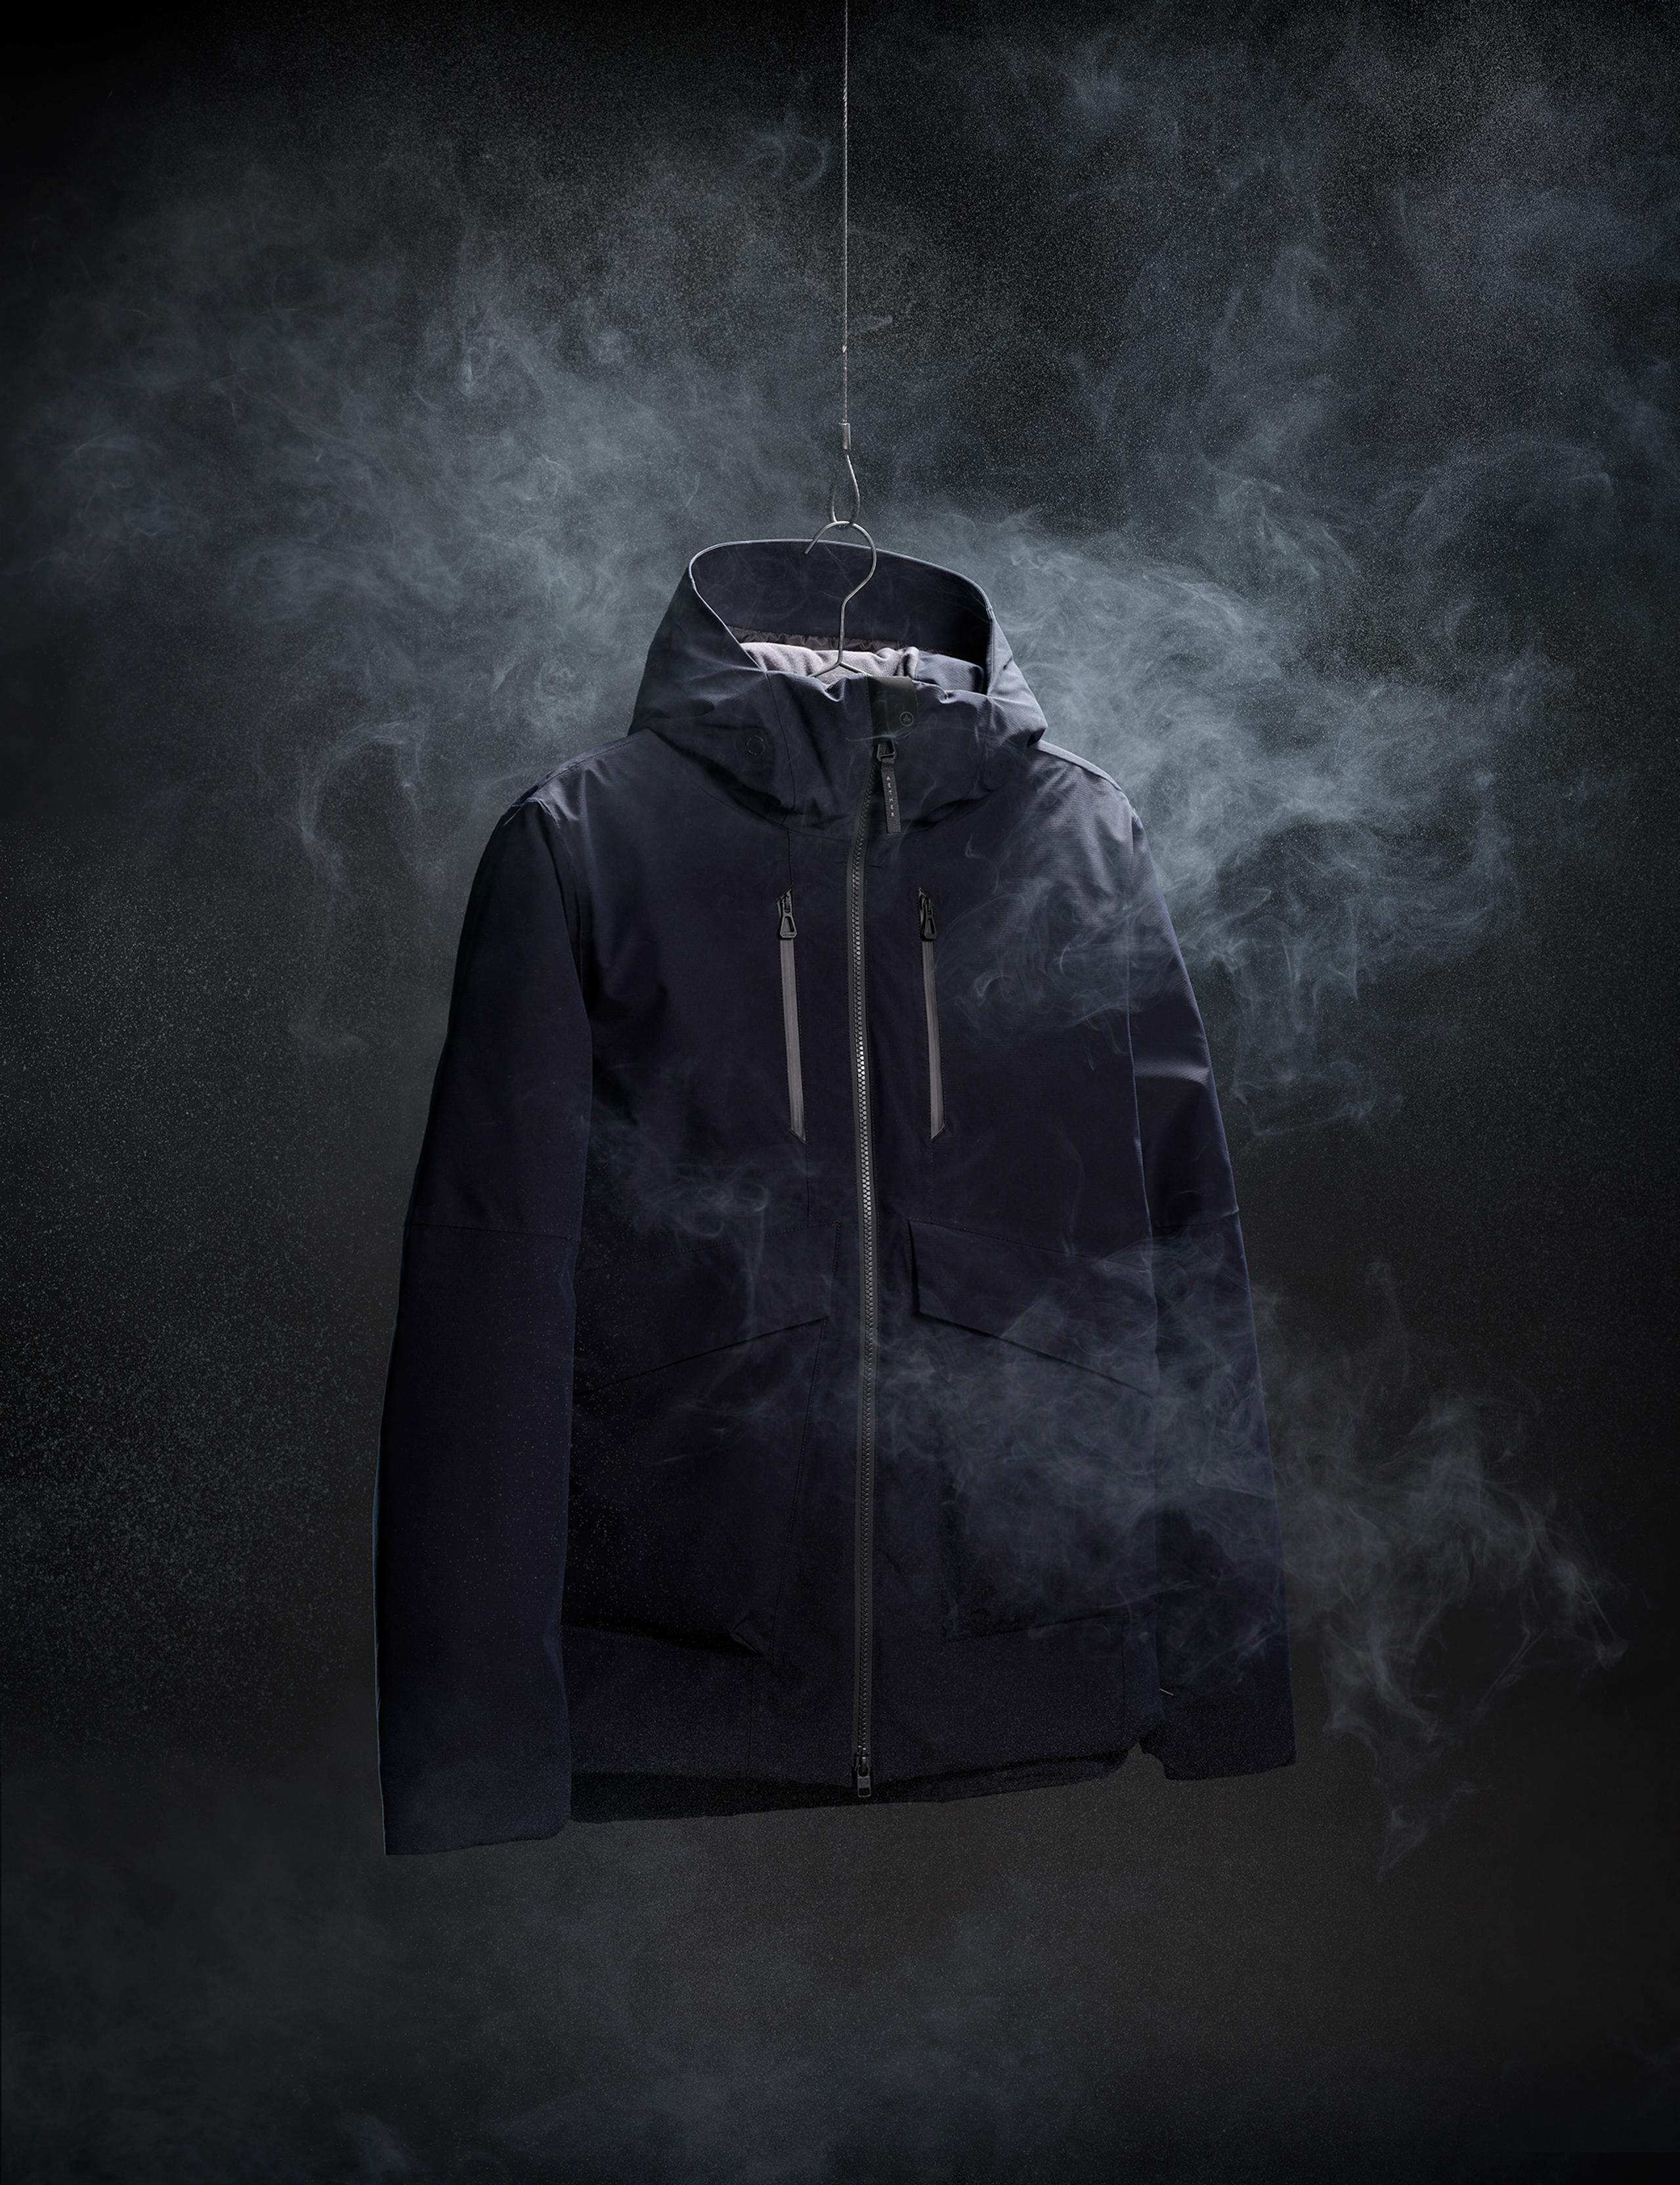 In studio photo of Silverton Jacket hanging against black background with white mist around it